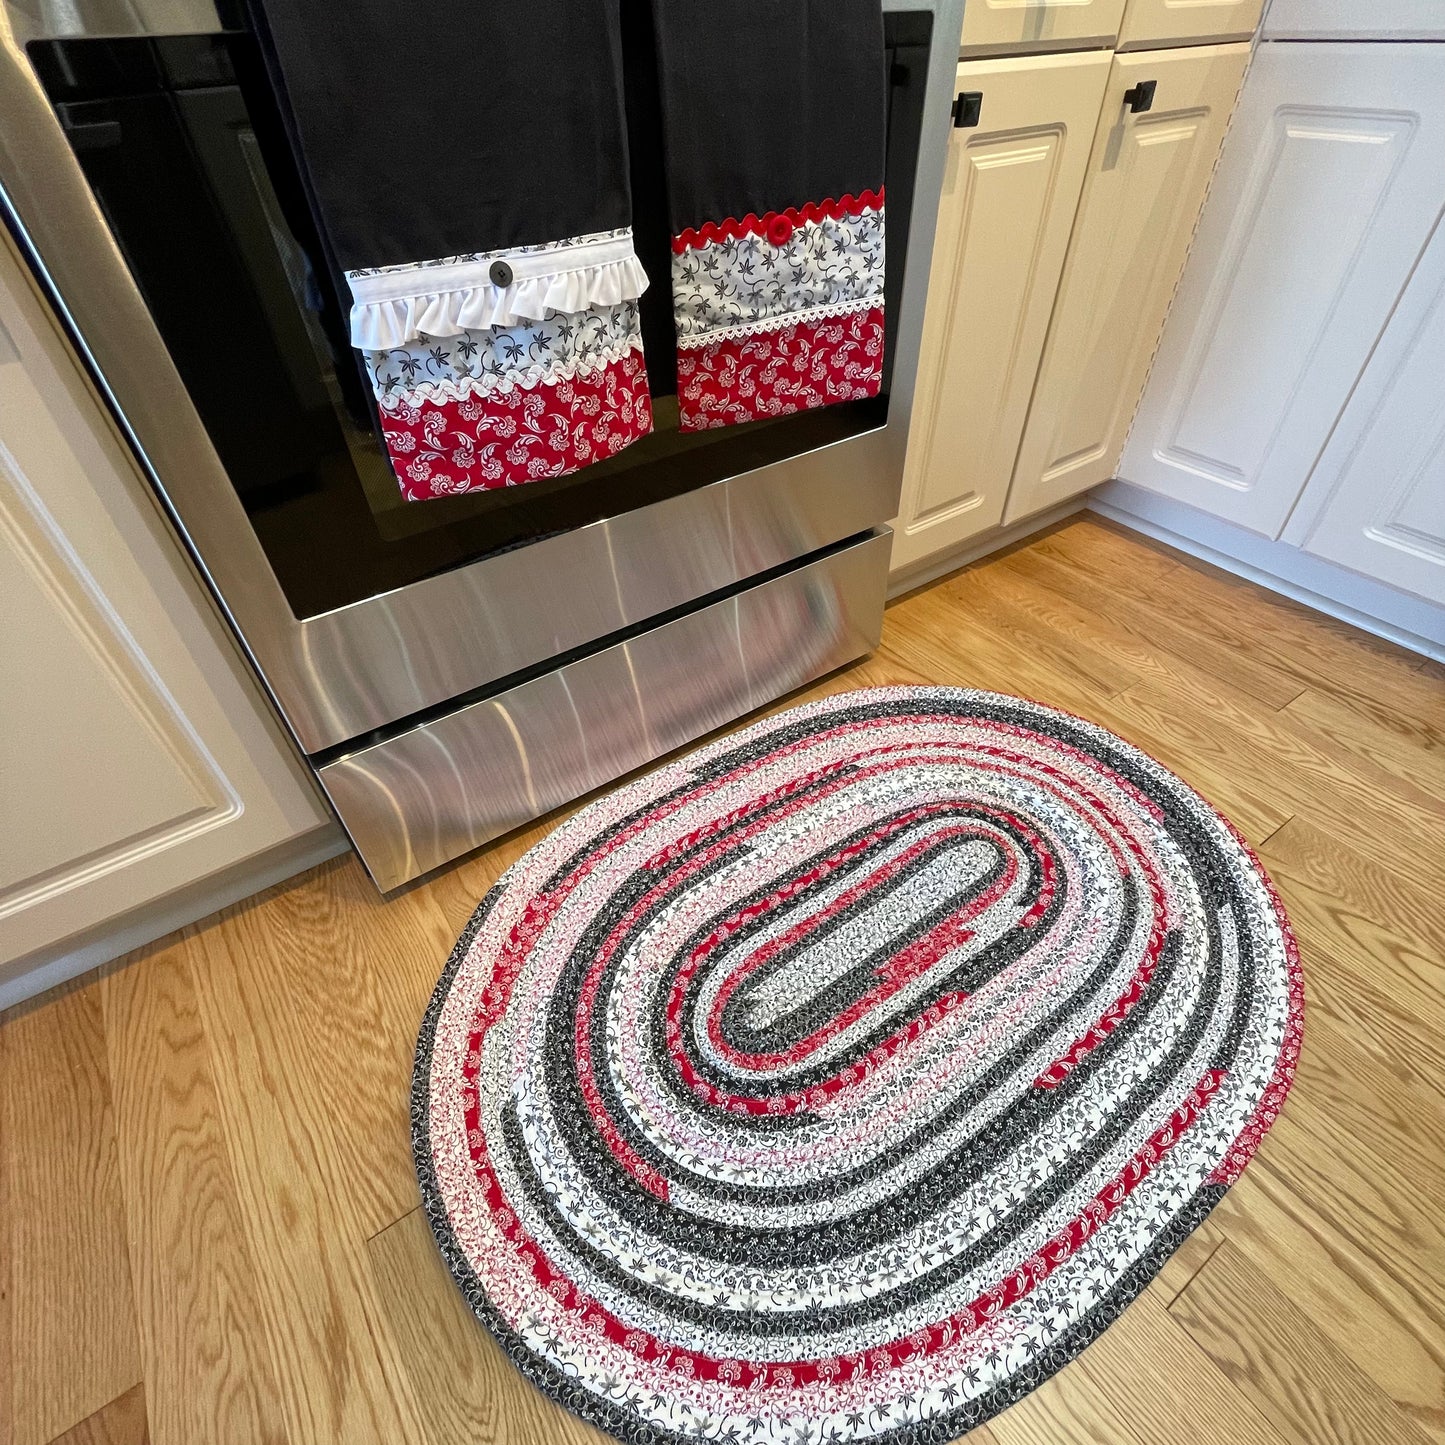 Vintage Red, White & Black Washable Cotton Farmhouse Kitchen JellyRoll Rug - Handmade in Canada